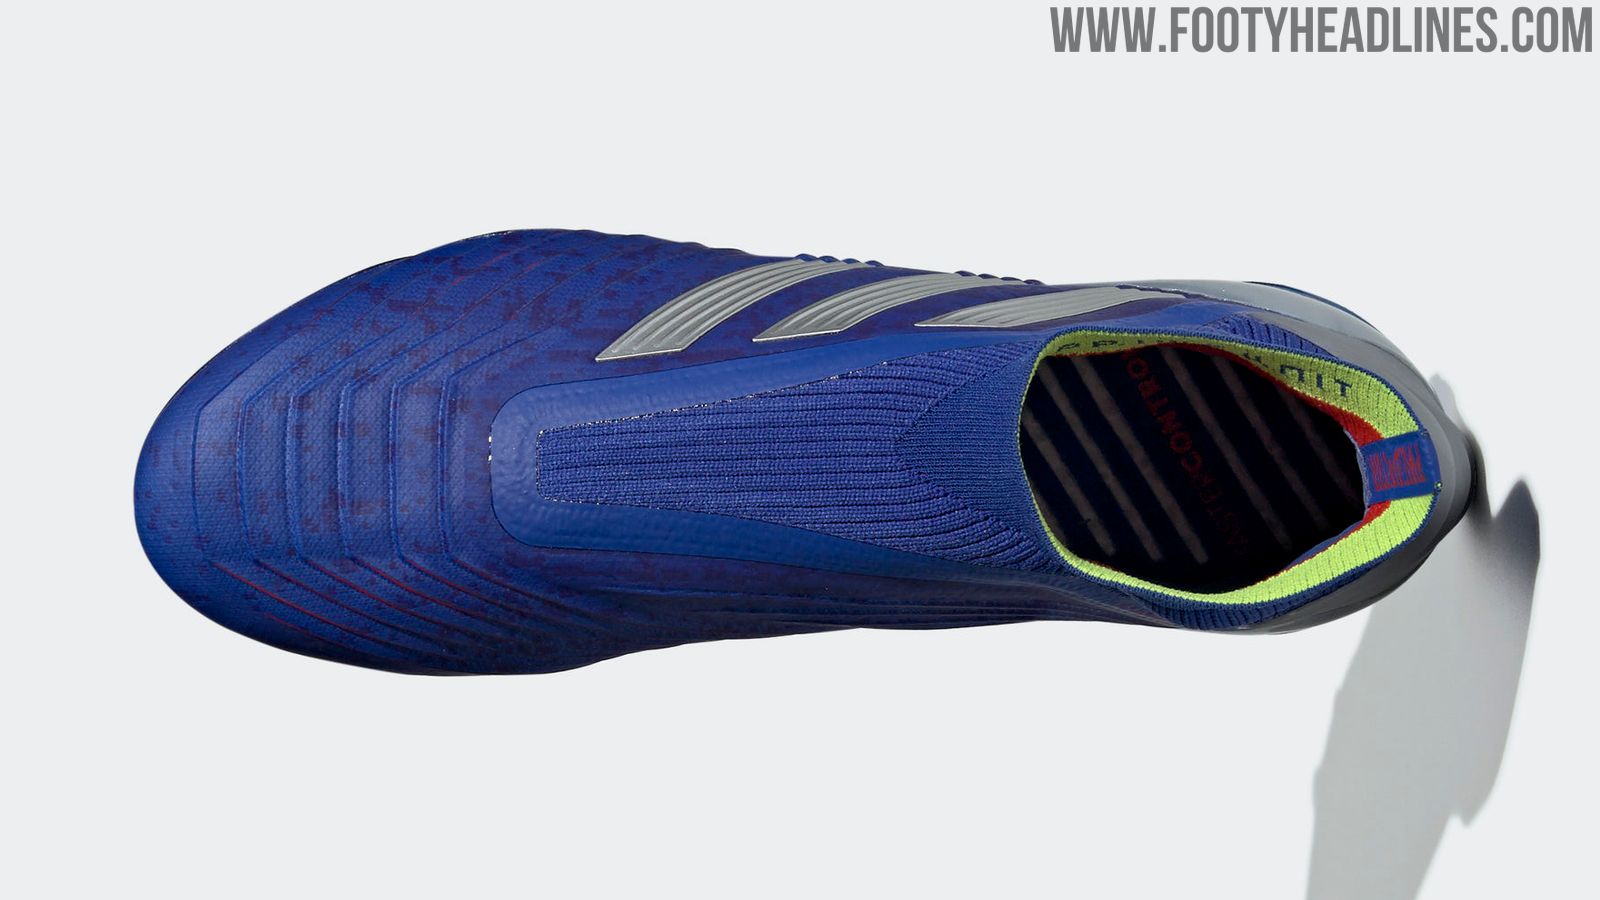 Adidas 'Exhibit Pack' 2019 Boots Released - Footy Headlines